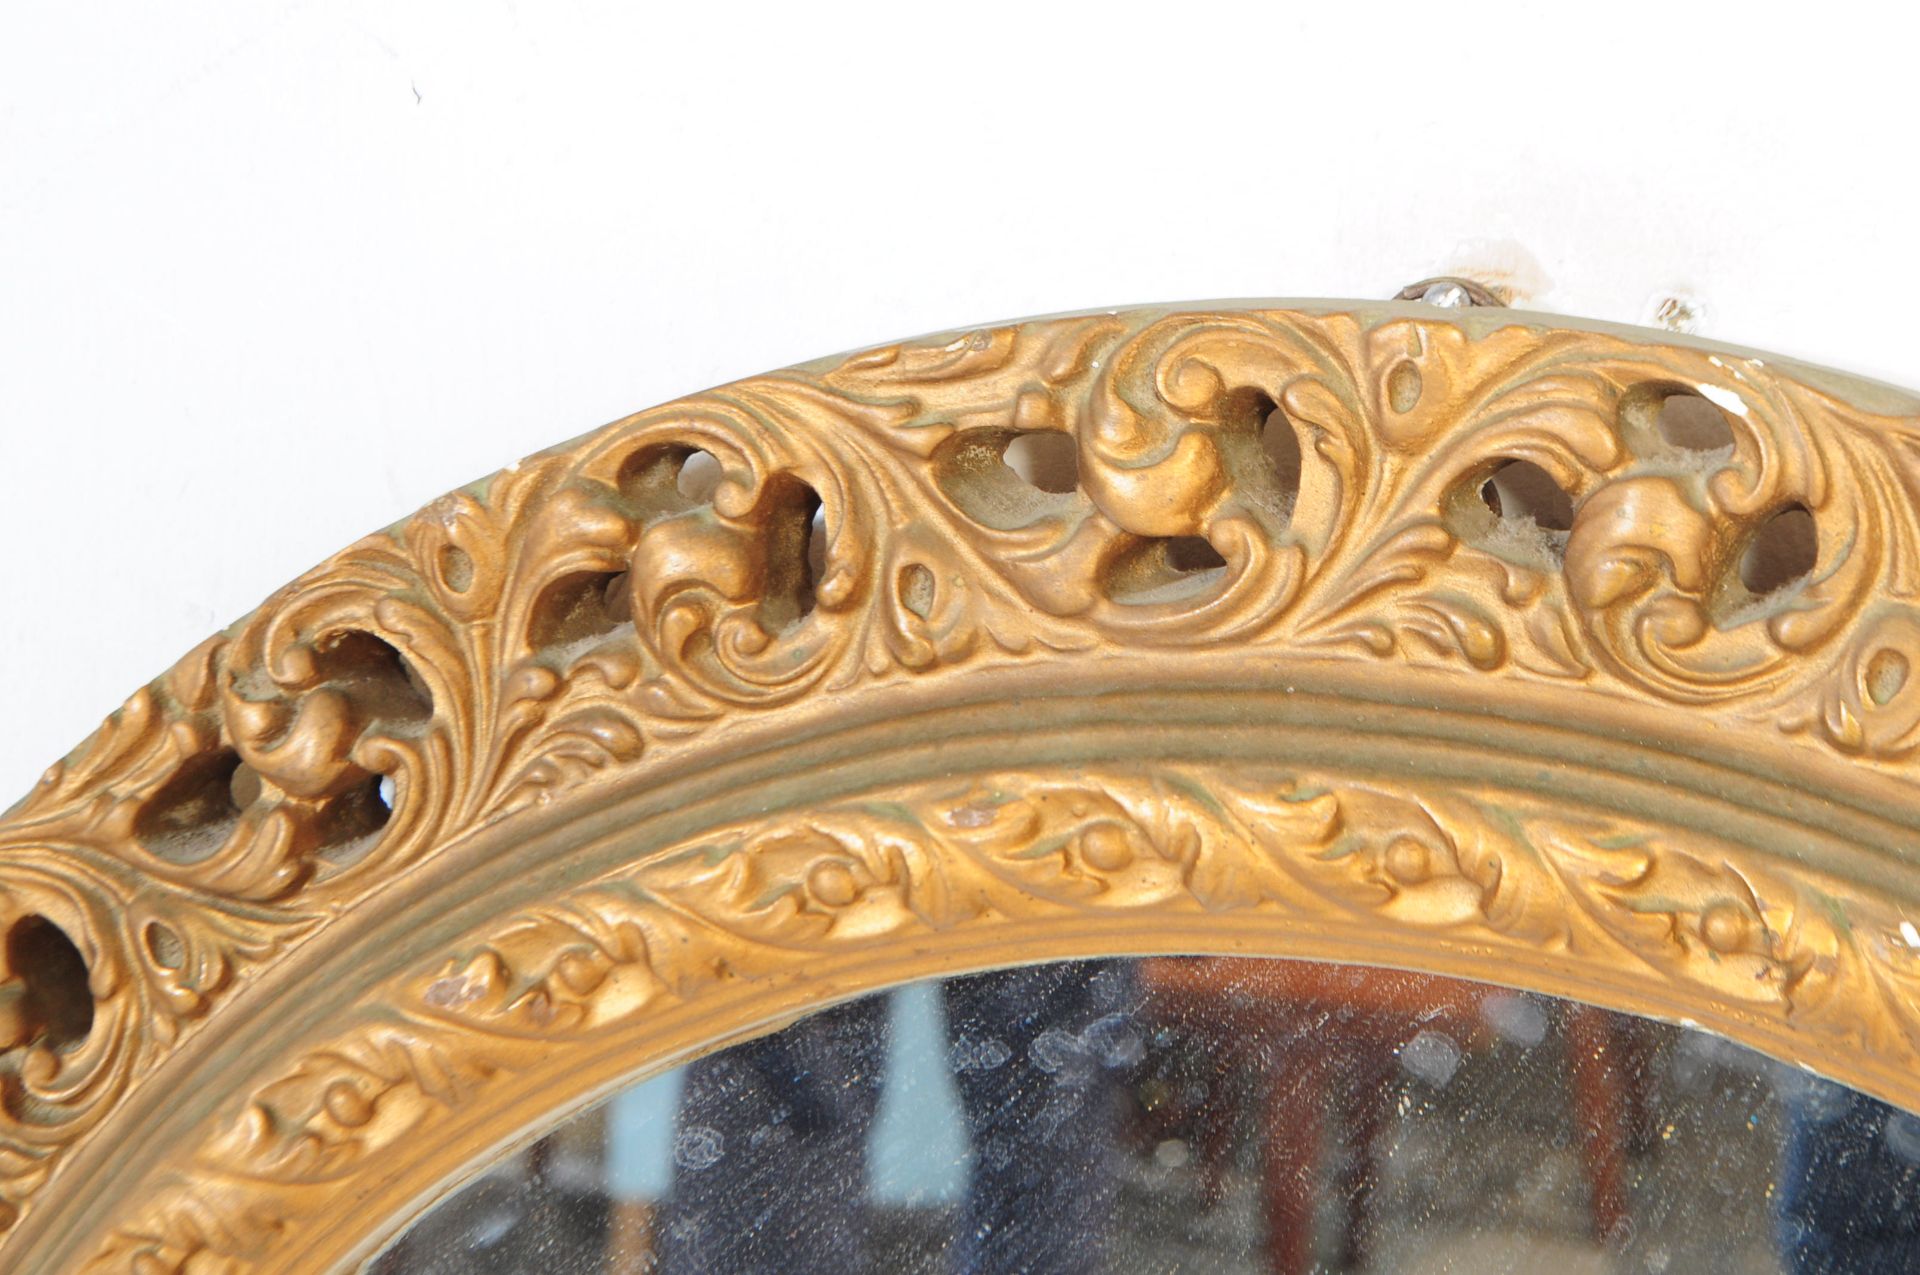 MID 20TH CENTURY INSET PLATE GLASS MIRROR WITH GILDED GILT FRAME - Image 2 of 4